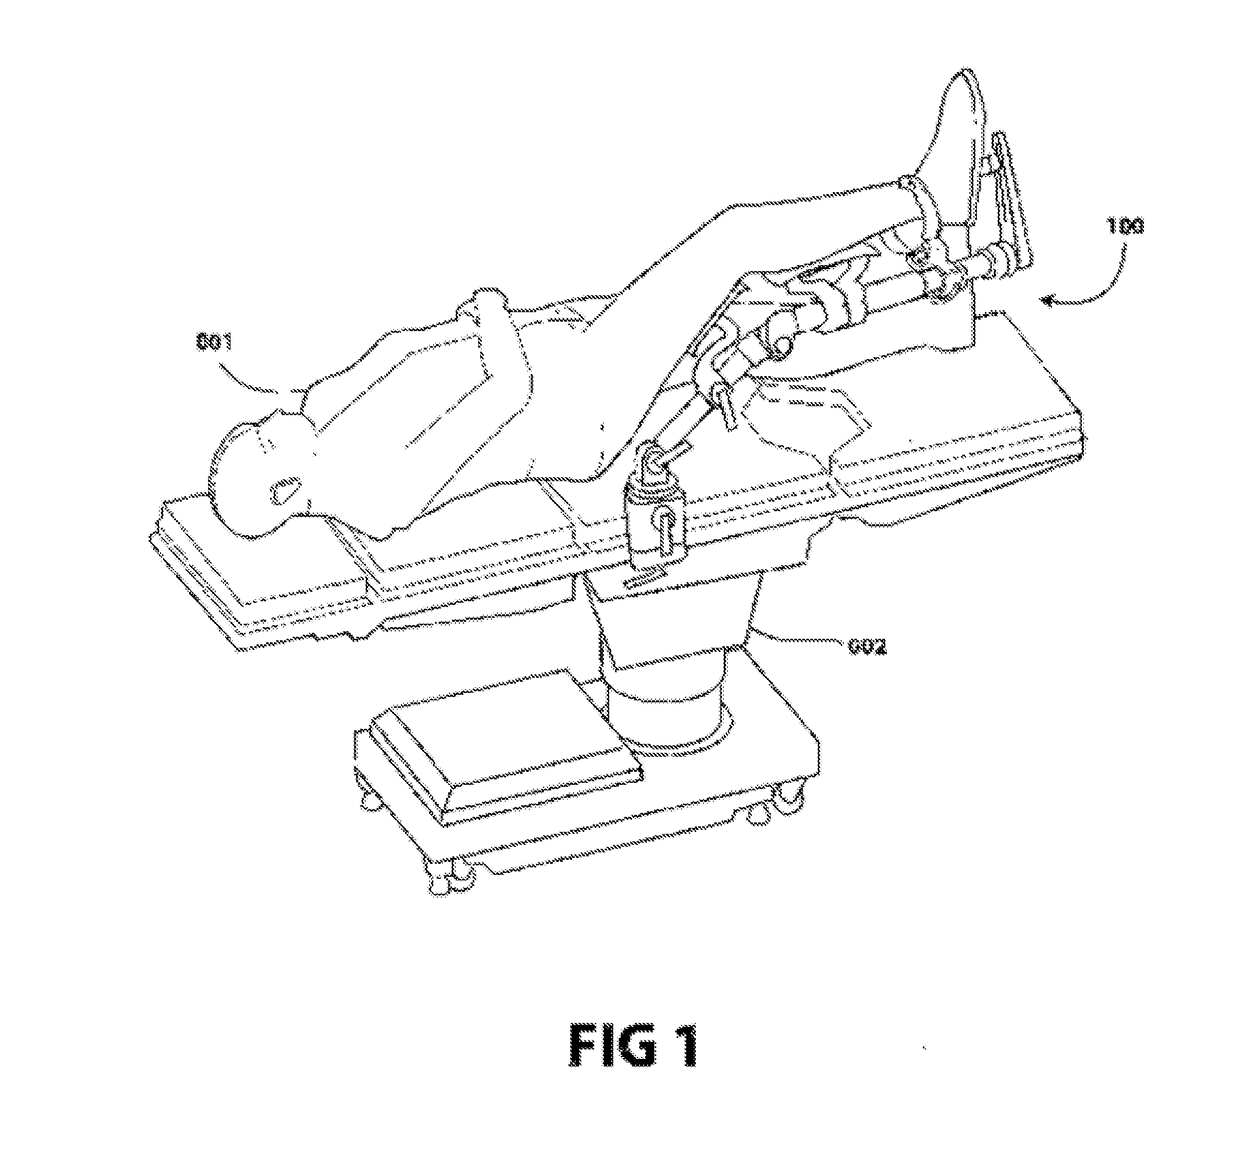 Lift for extremity surgical positioning device